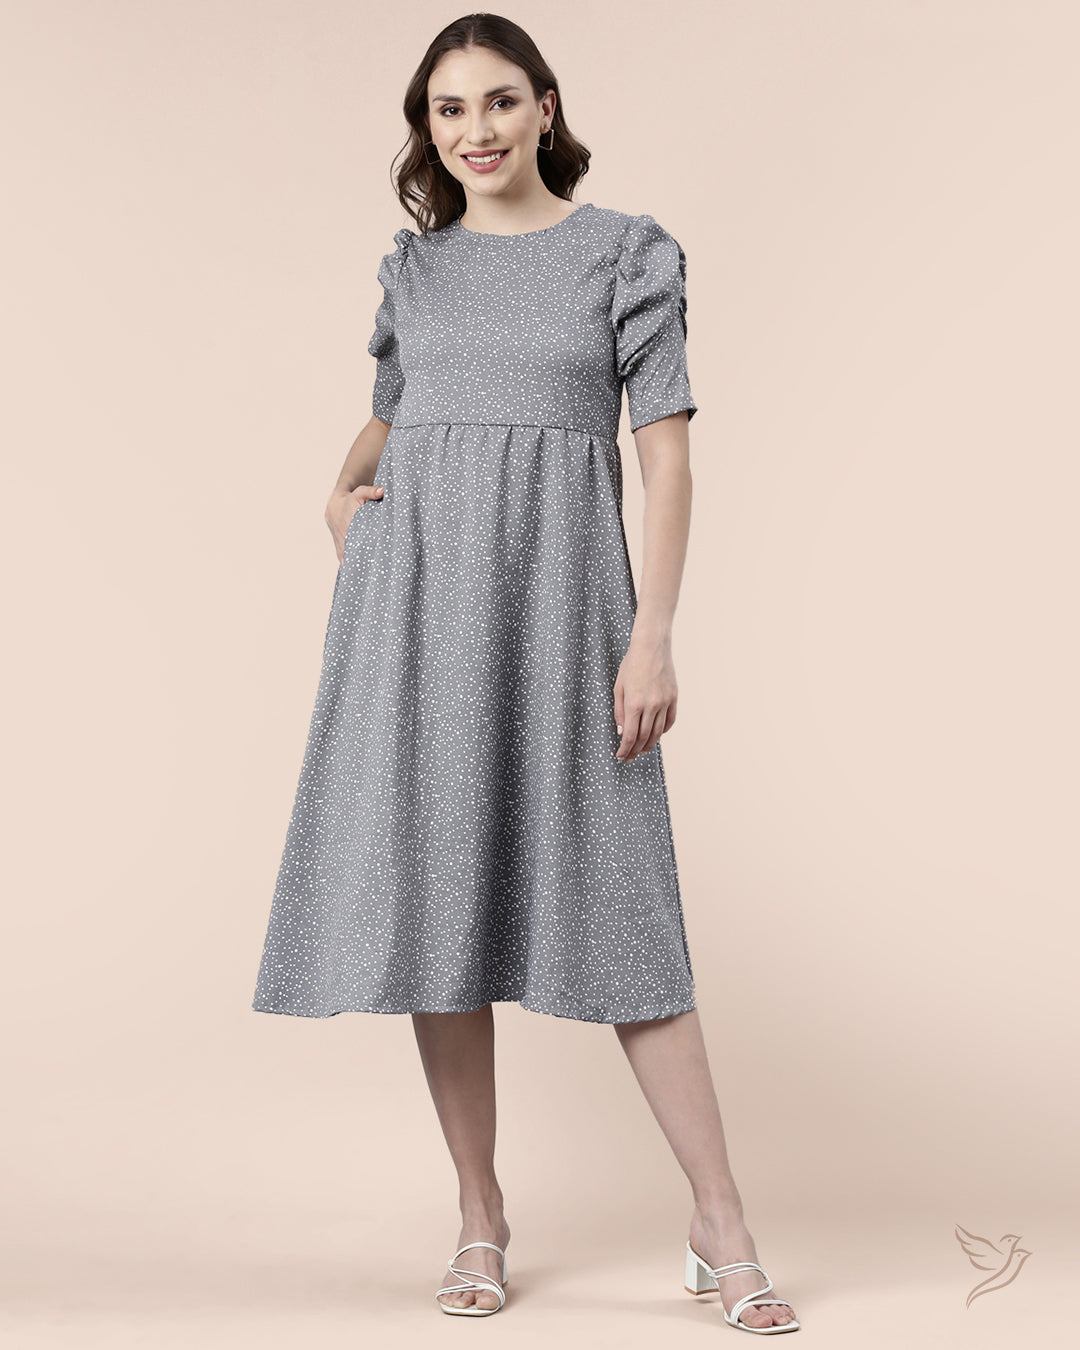 Grey Floral Printed Puff Sleeve Dress for Women